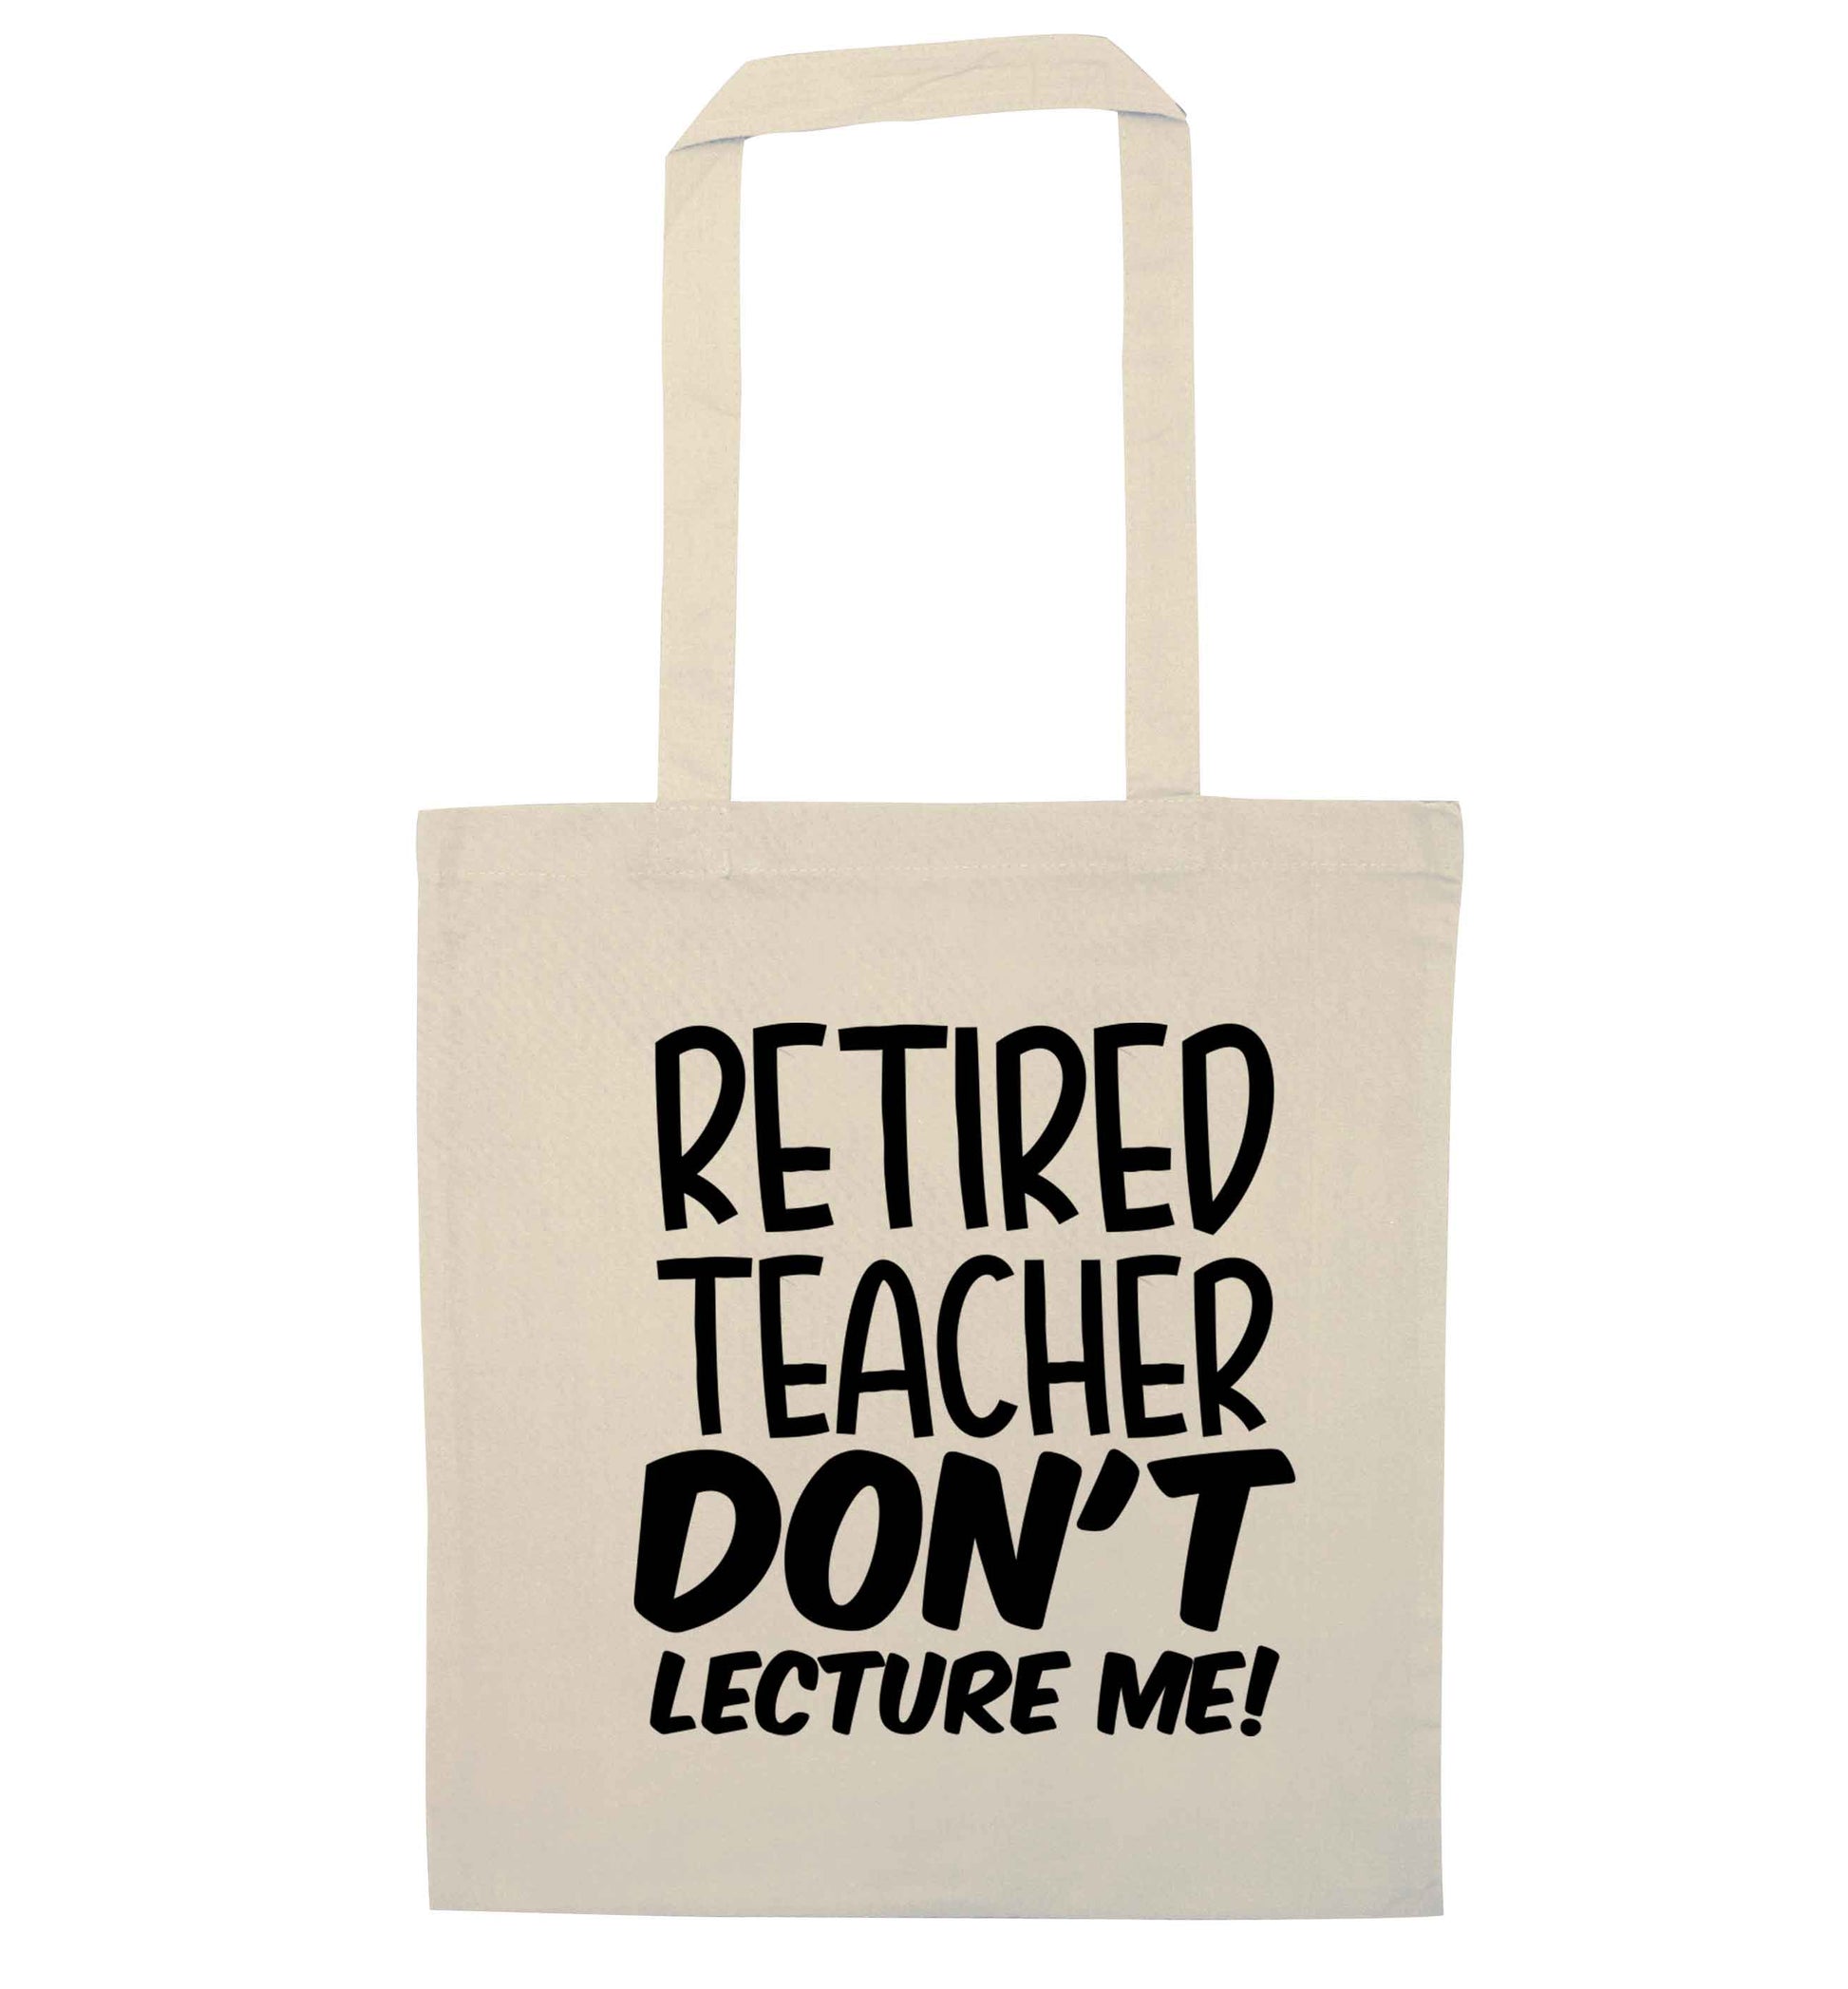 Retired teacher don't lecture me! natural tote bag